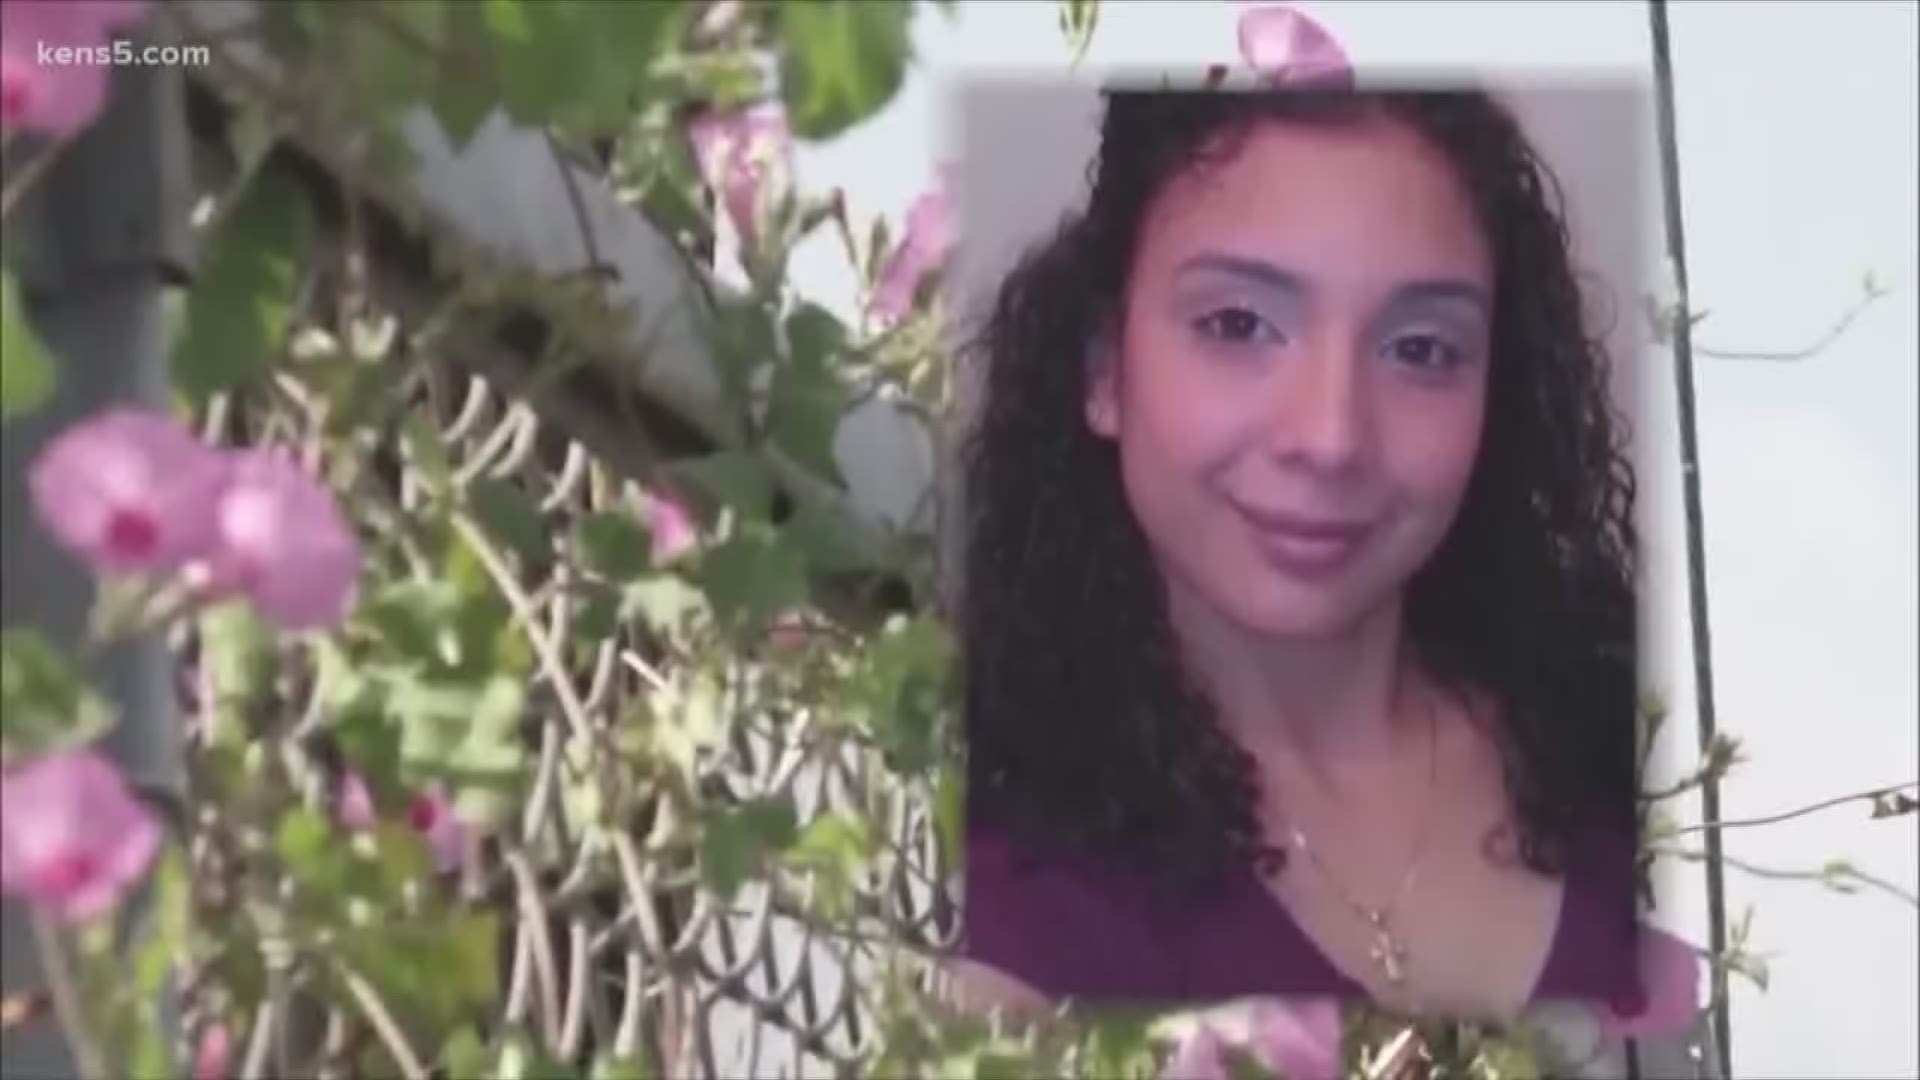 A volunteer group has been following any lead they can find to try and find Cecilia Huerta Gallegos.